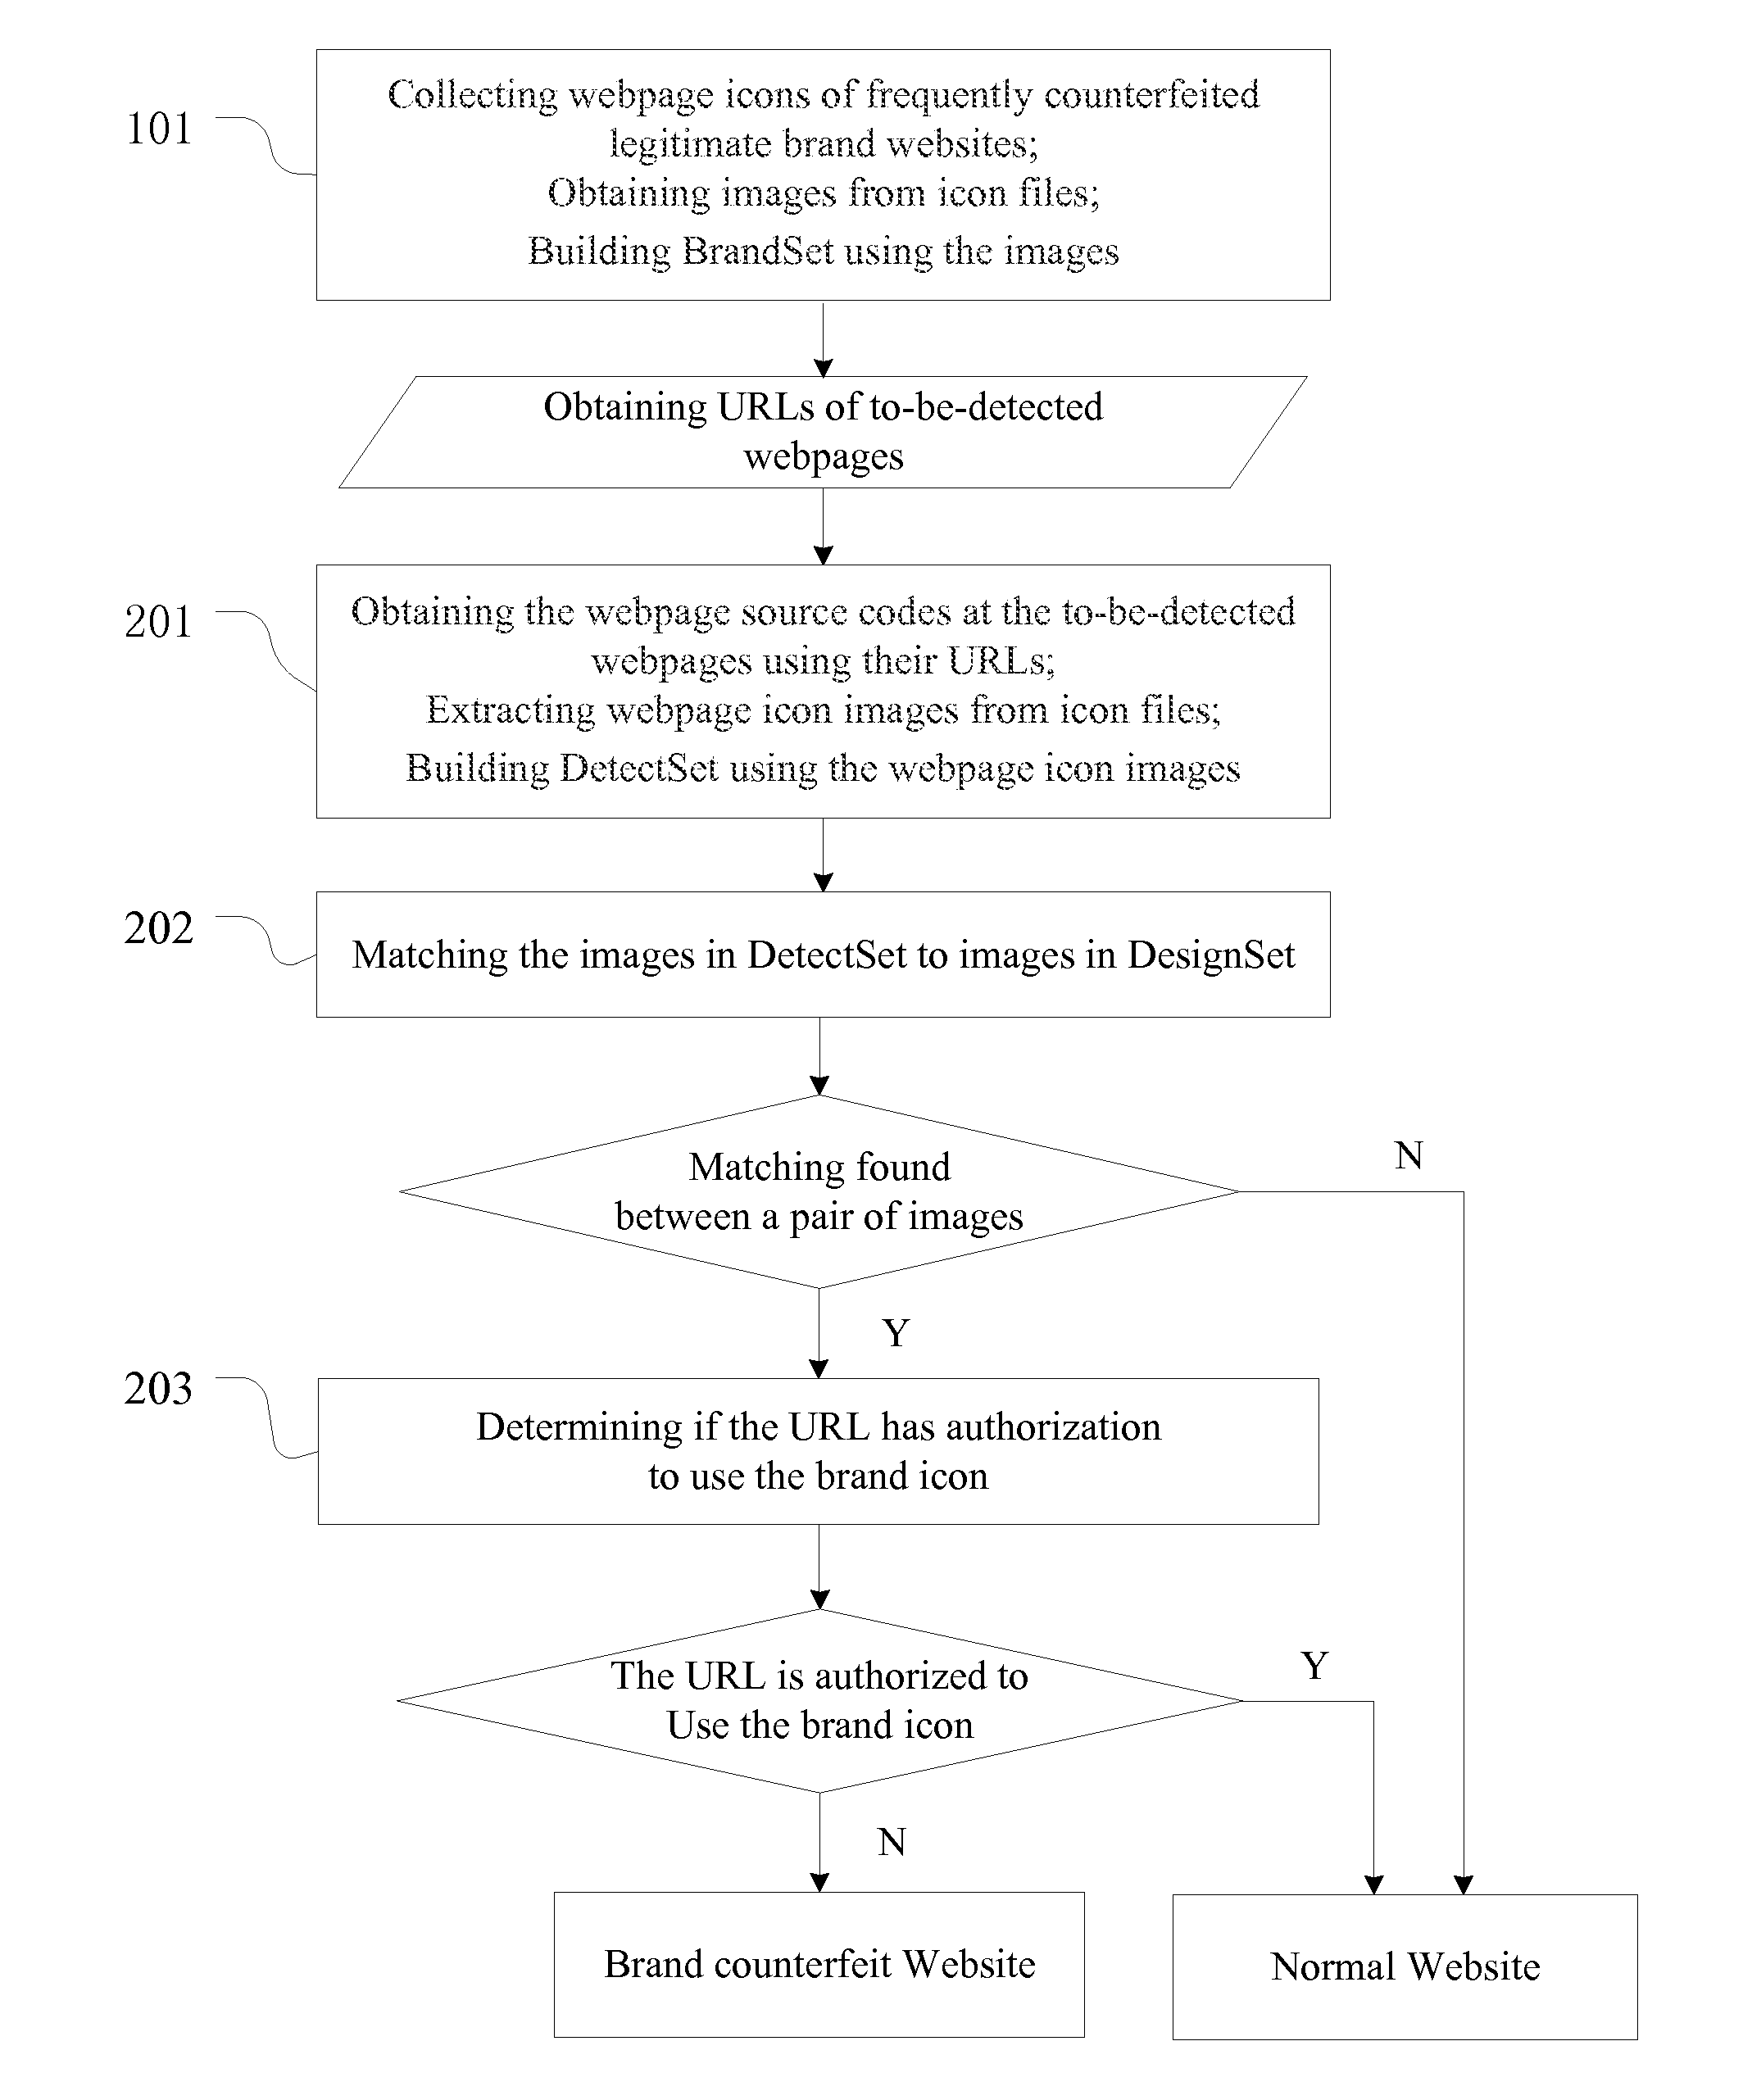 Method for detecting brand counterfeit websites based on webpage icon matching